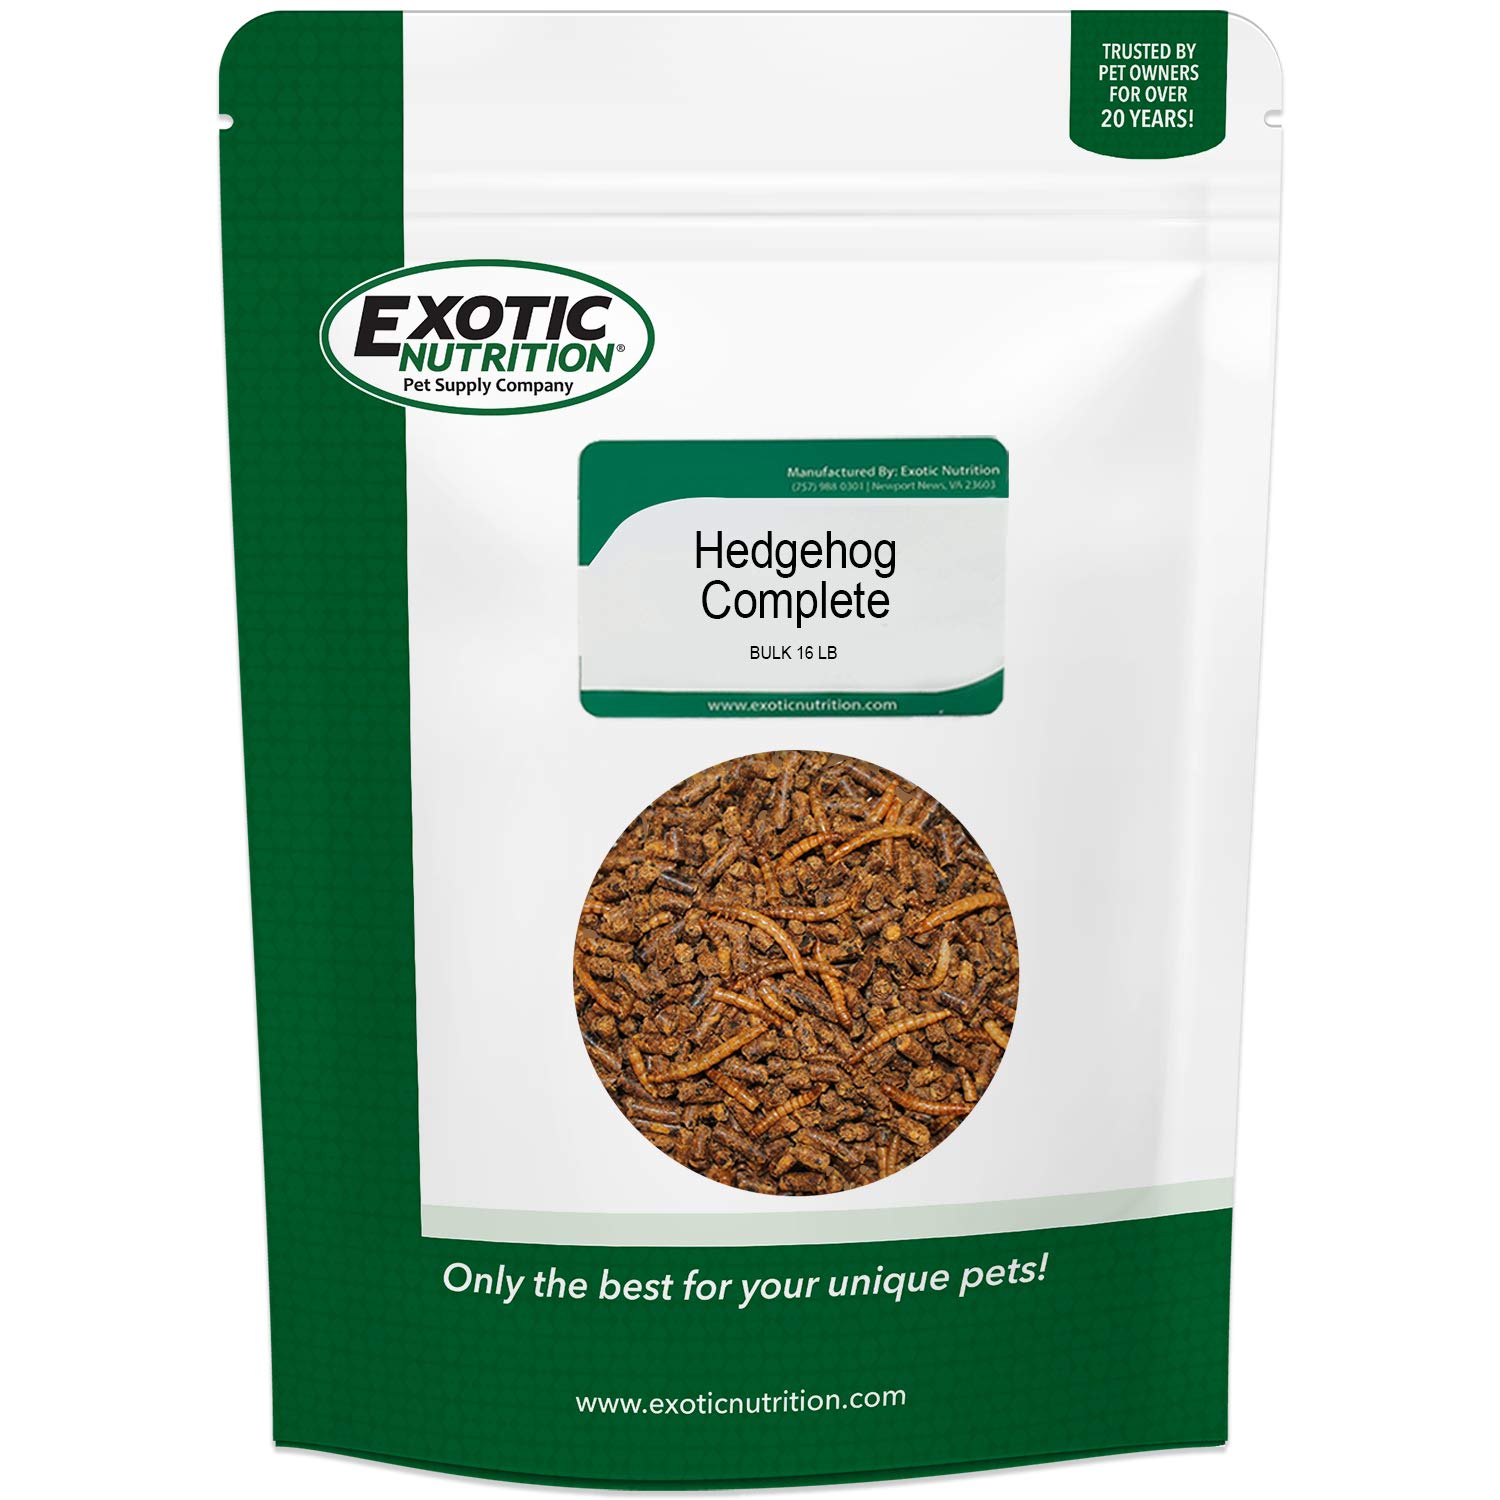 Exotic Nutrition Hedgehog Complete 16 Lb - Nutritionally Complete Natural Healthy High Protein Pellets Dried Mealworms - Food For Pet Hedgehogs